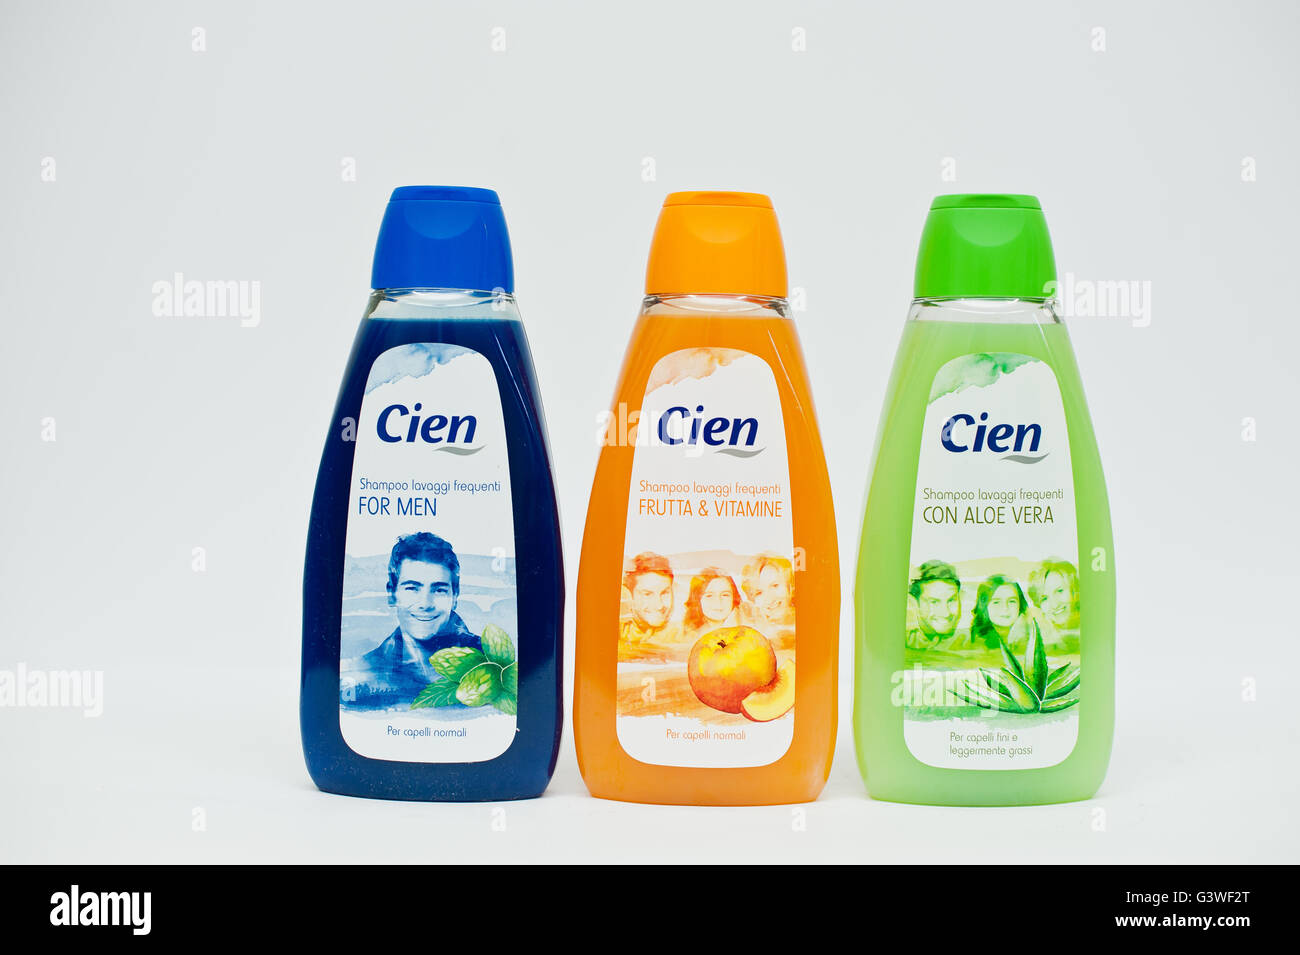 Shower gel for man - Cien brand by Lidl Stock Photo - Alamy